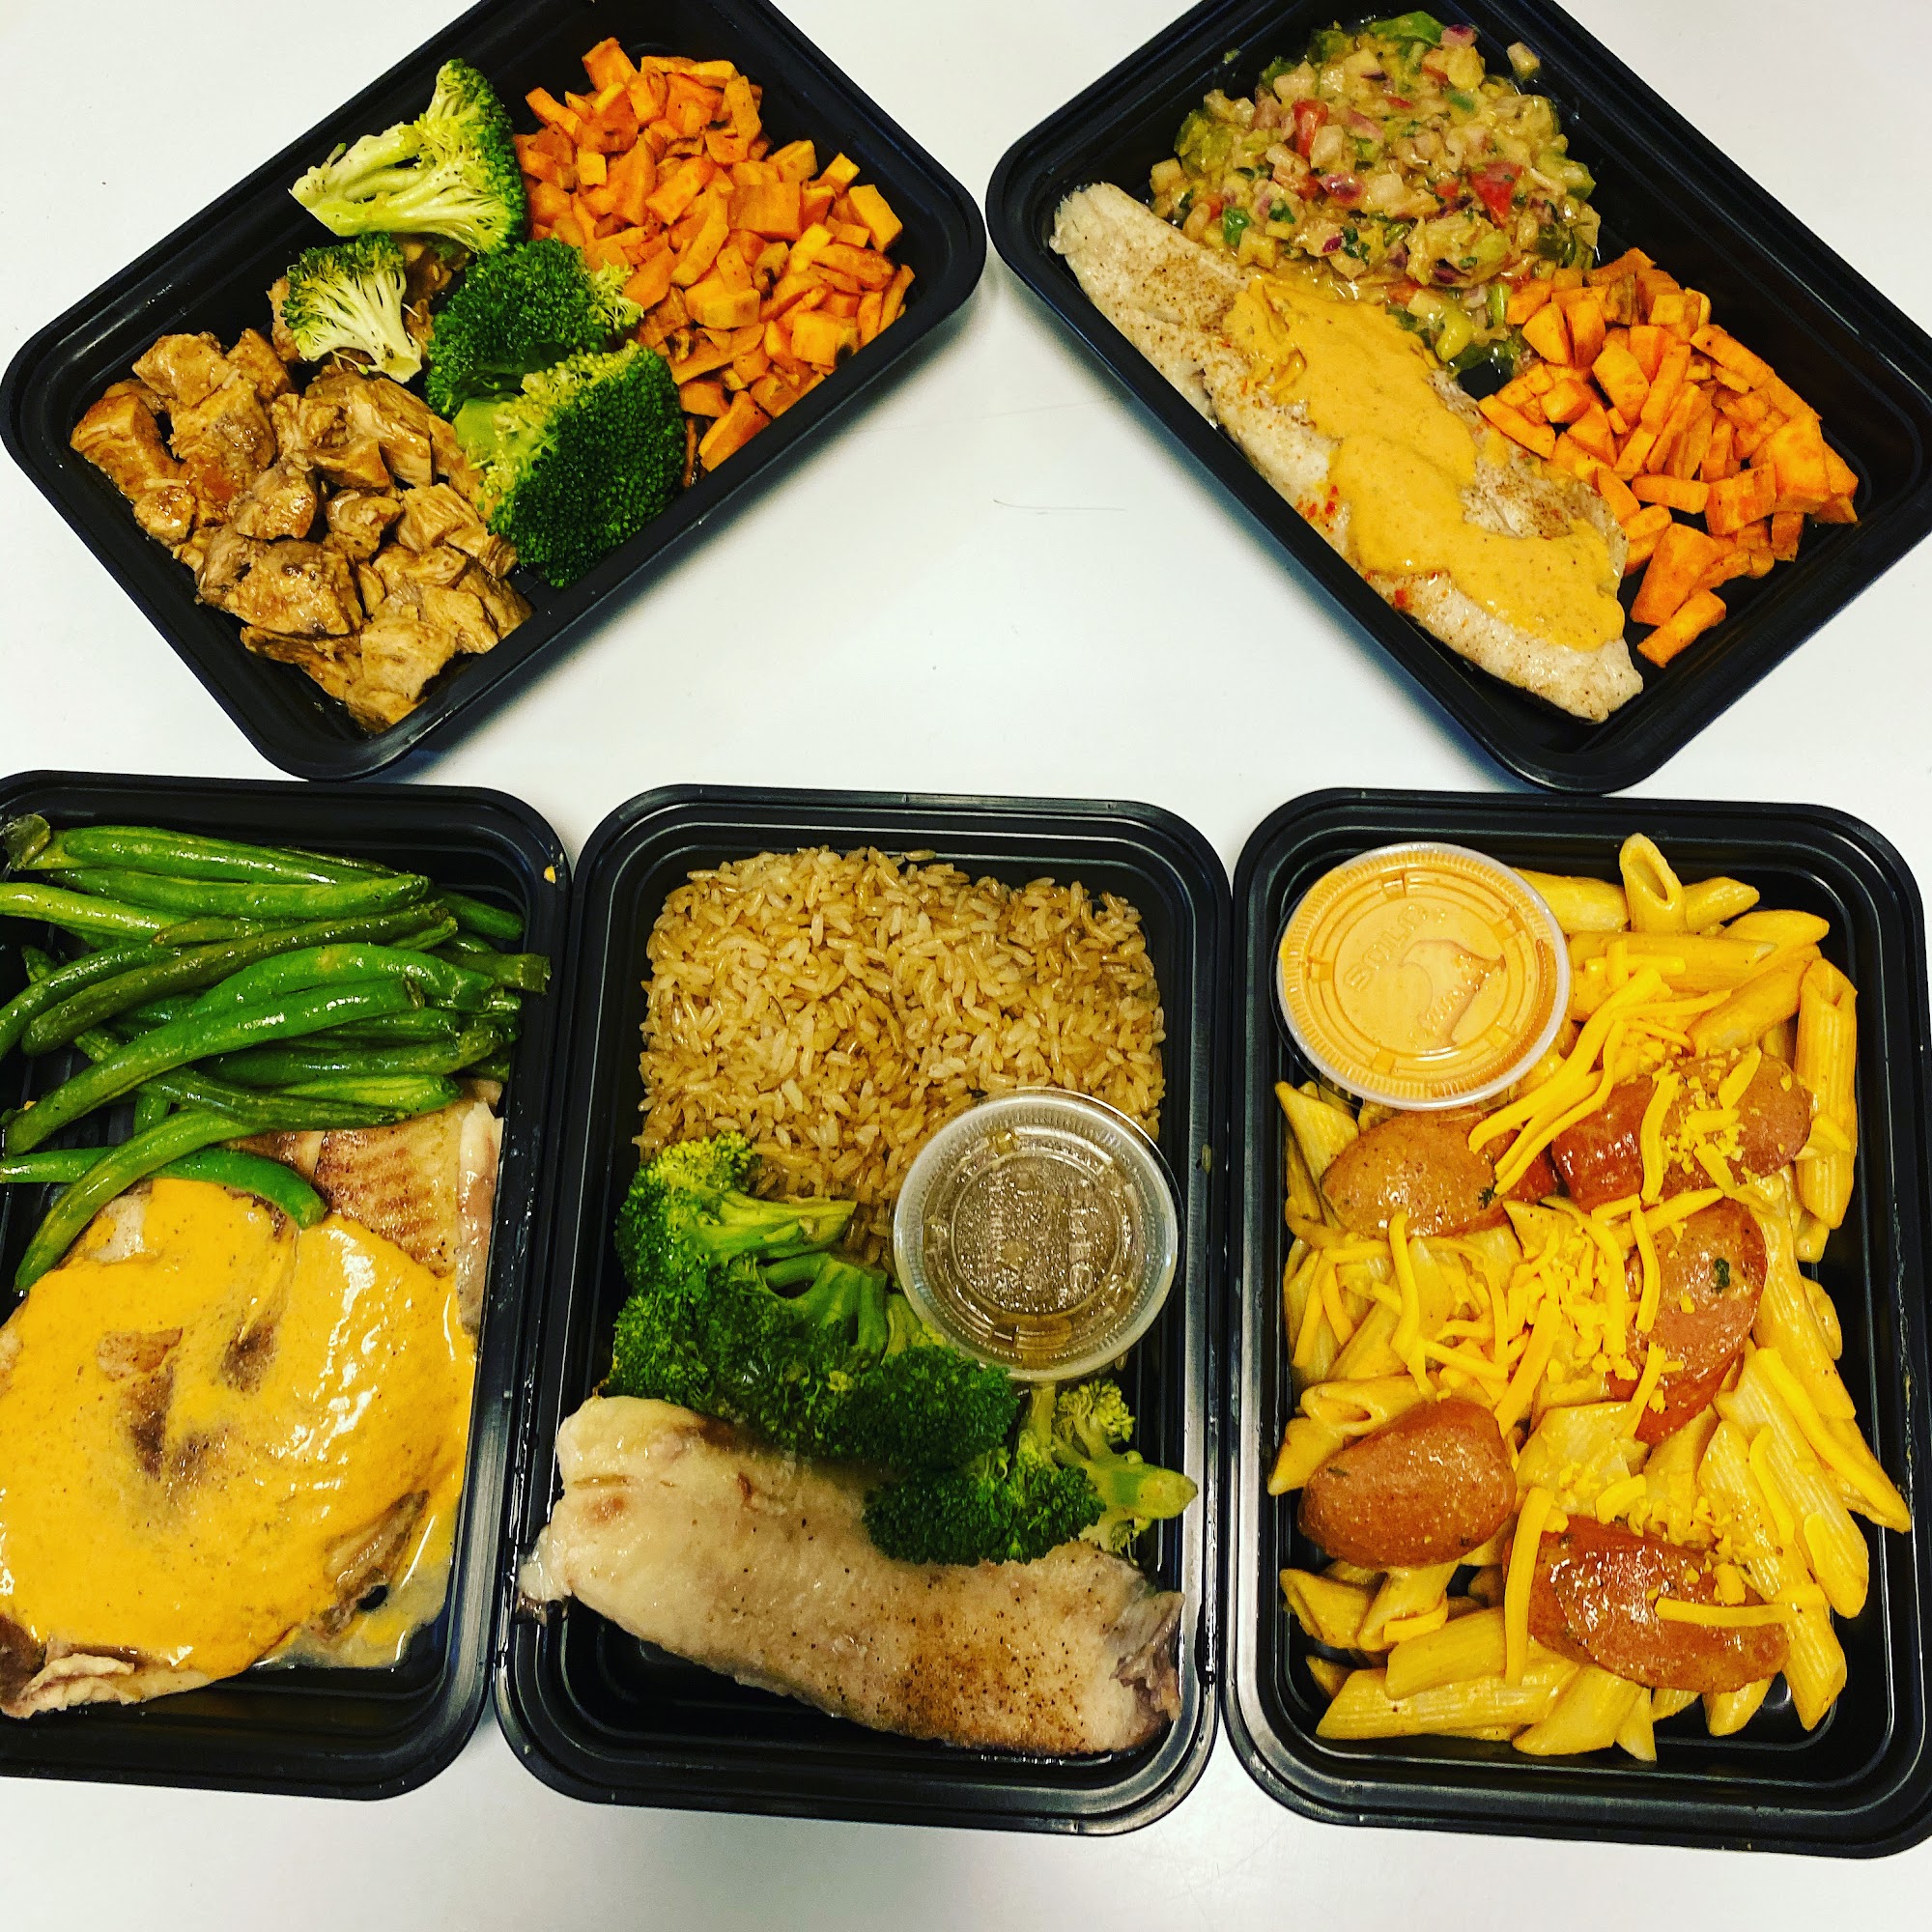 Diddy's Fresh, a meal prep service